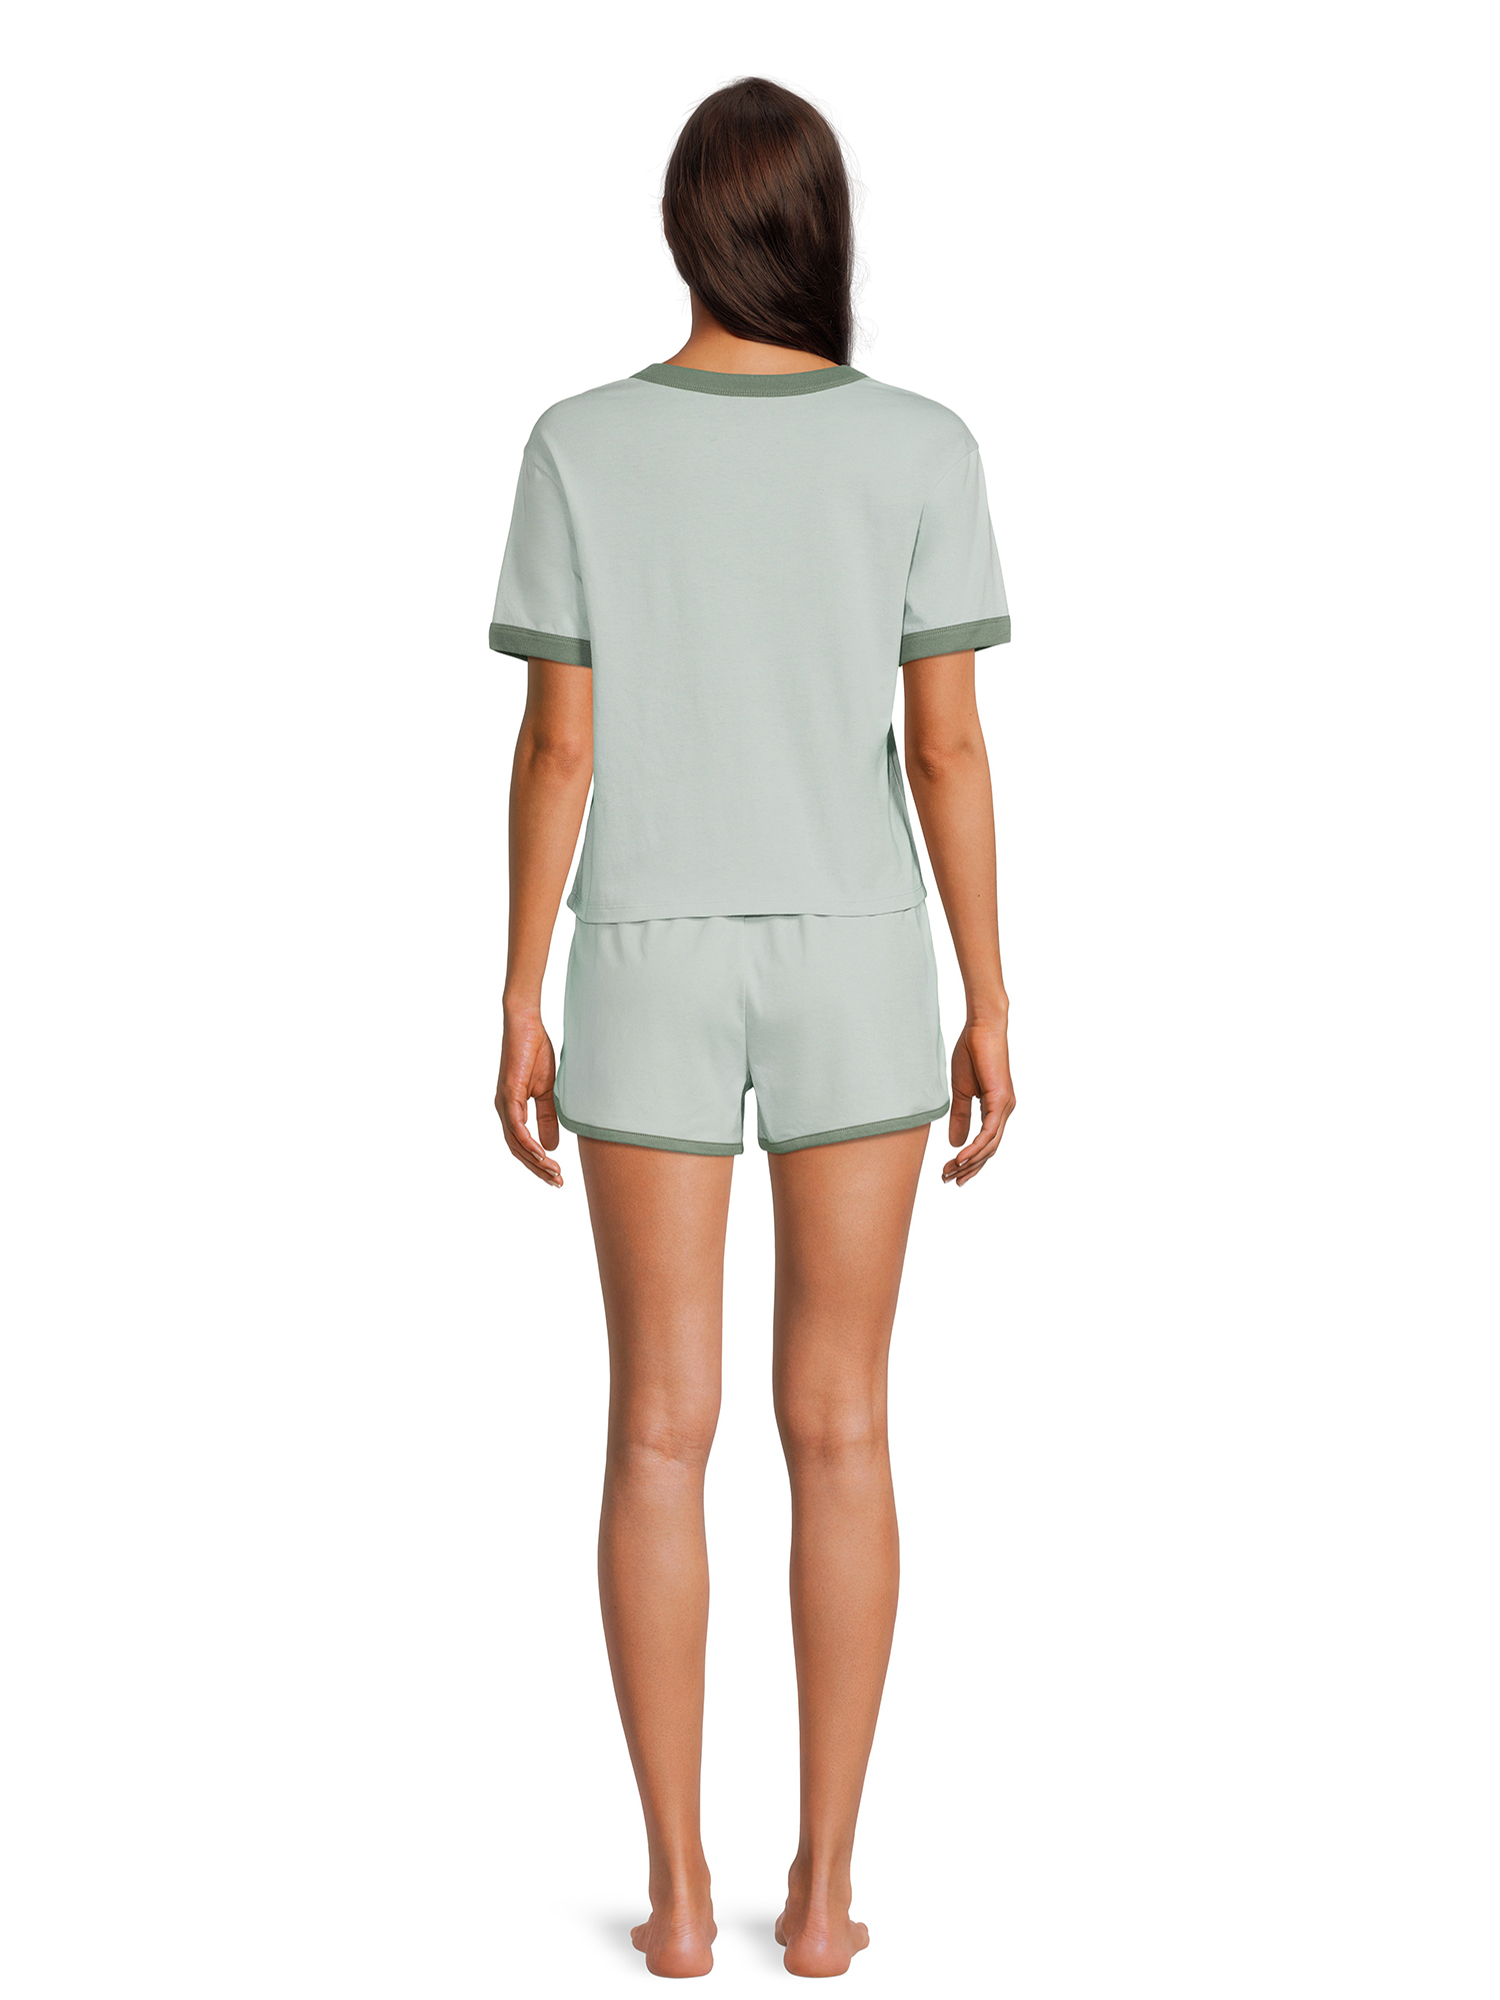 Good Things Women's Ringer Tee and Short Sleep Set, 2-Piece - image 2 of 5